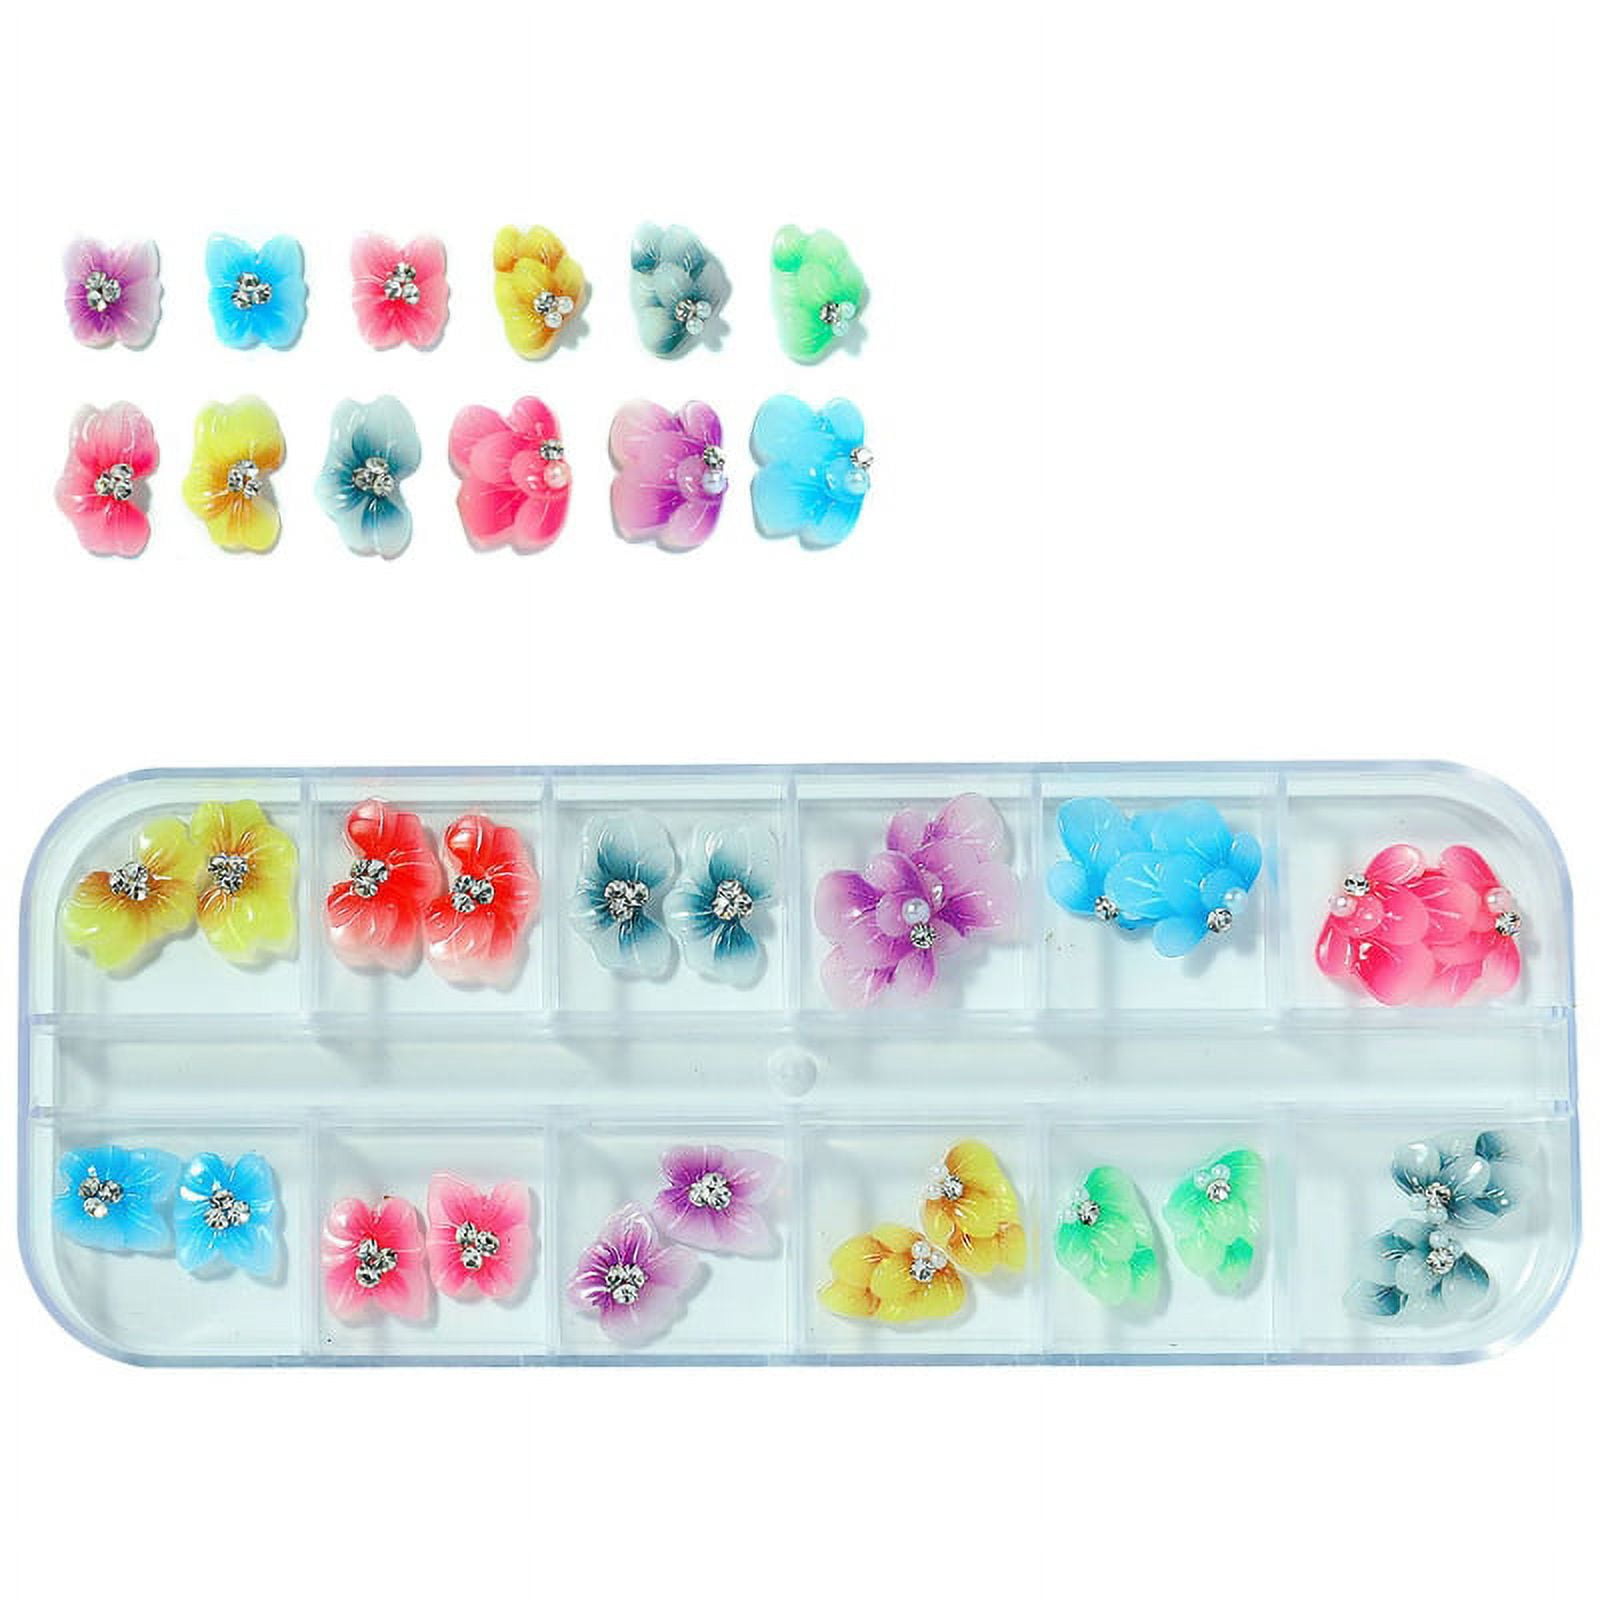 228pcs Cosmos Cat Resin Fillers Leaf Musical Note Alloy Cabochons Resin  Fillers Alloy Epoxy Resin Supplies Filling Accessories Nail Art Decoration